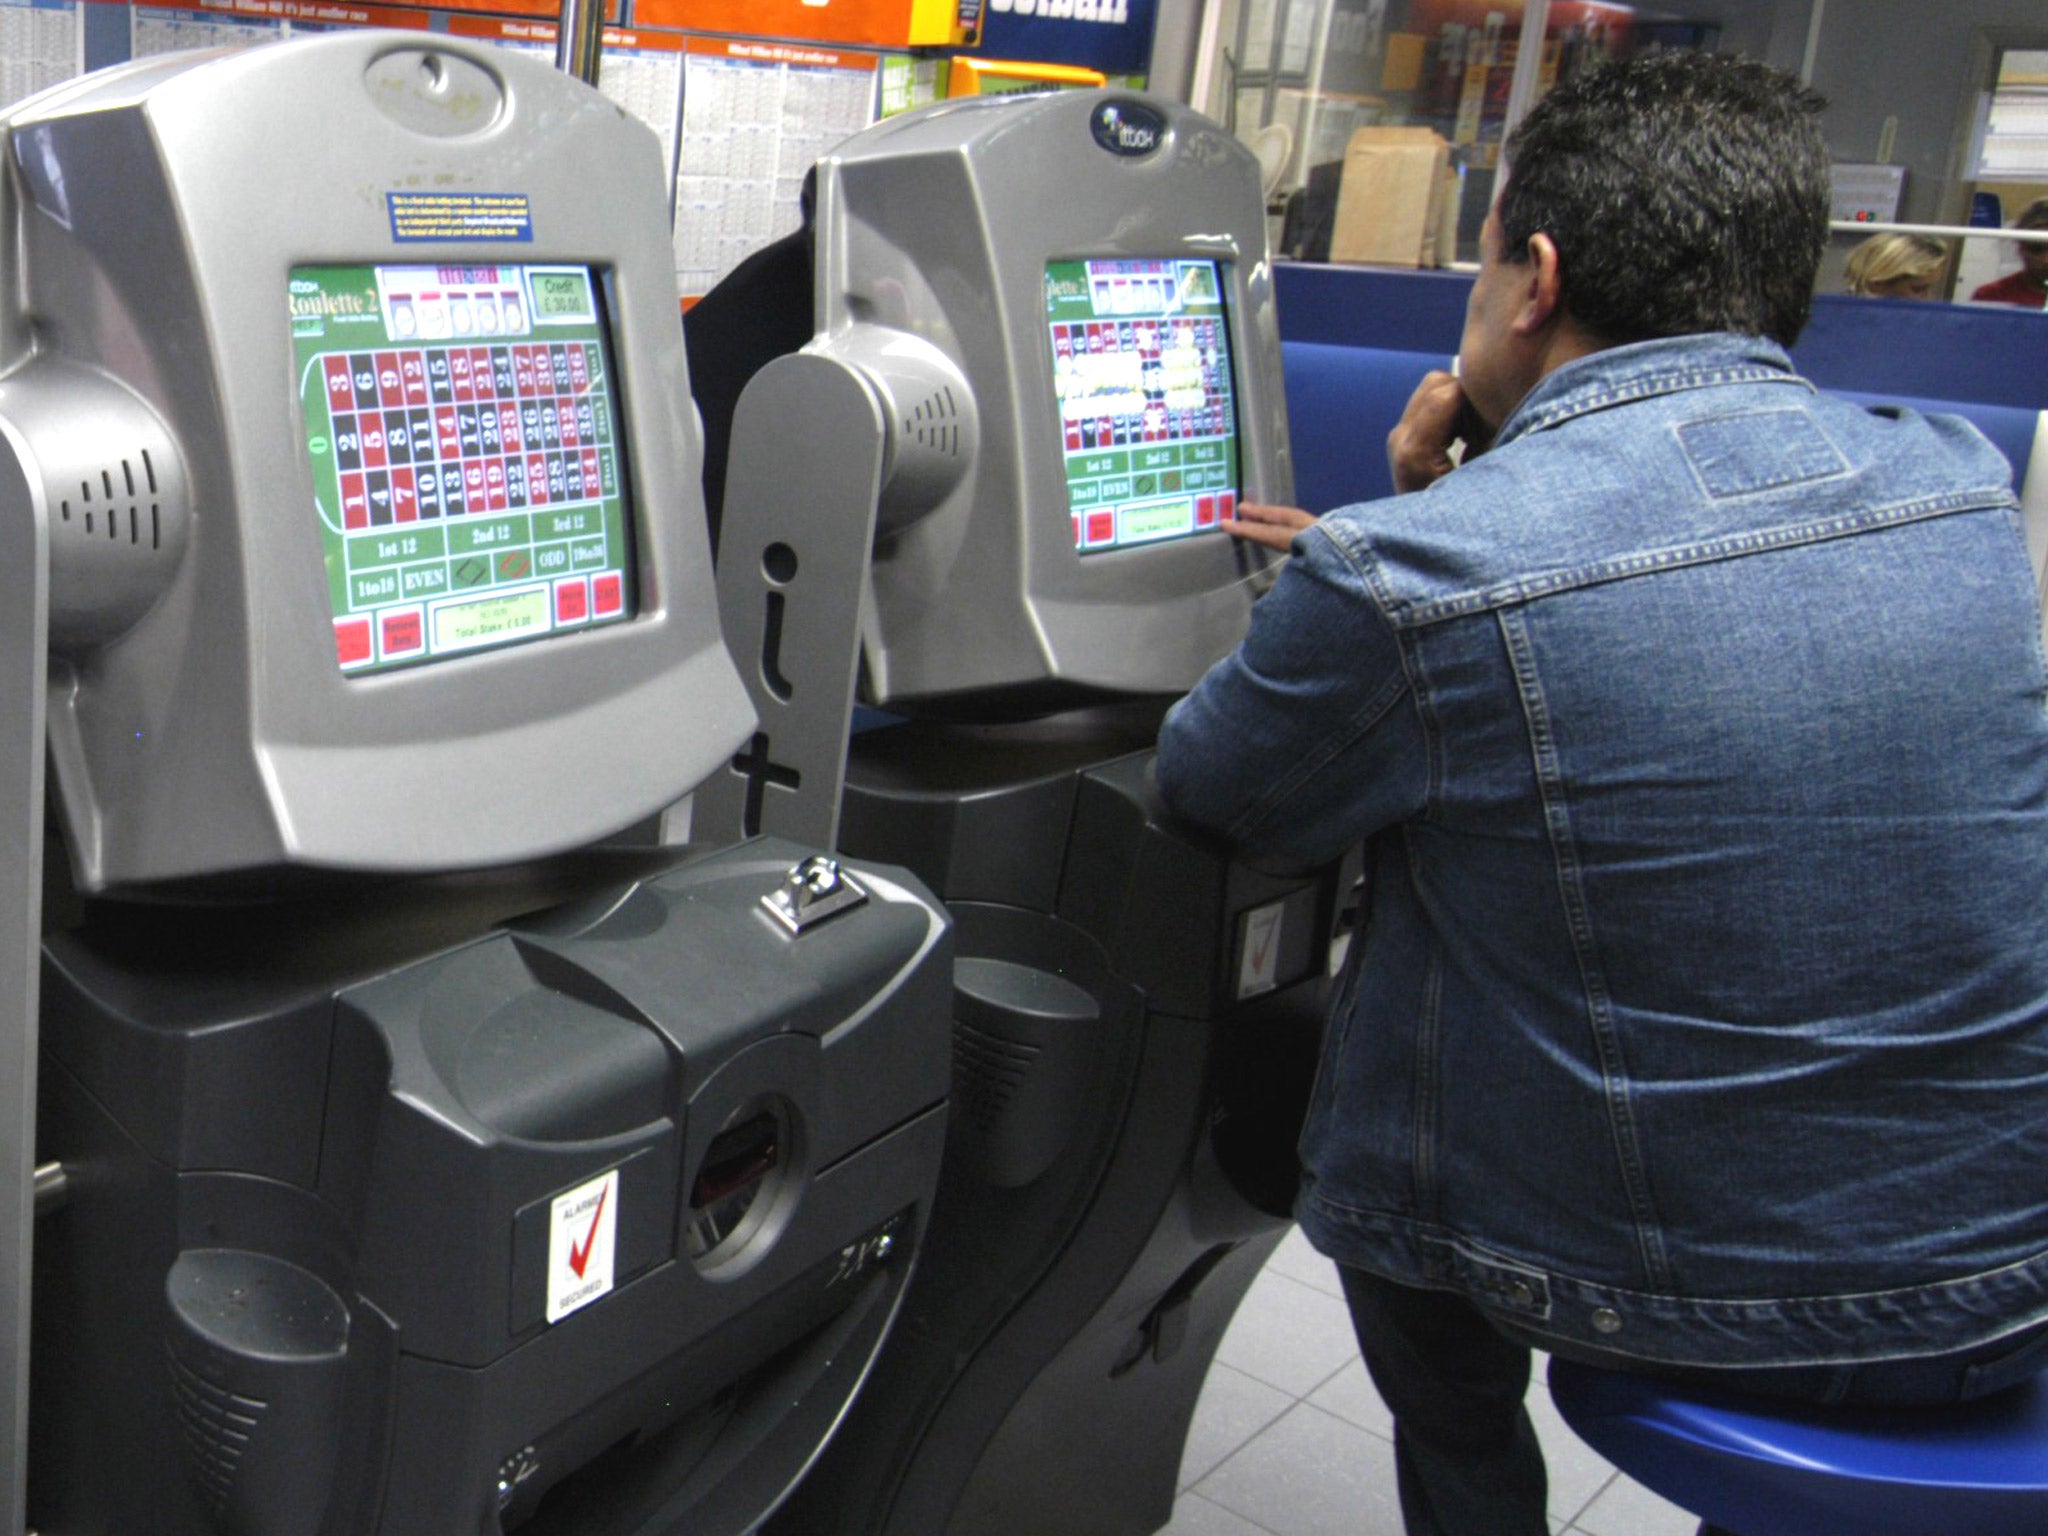 FOBTs accounted for 52 per cent of profits for the major industry players last year